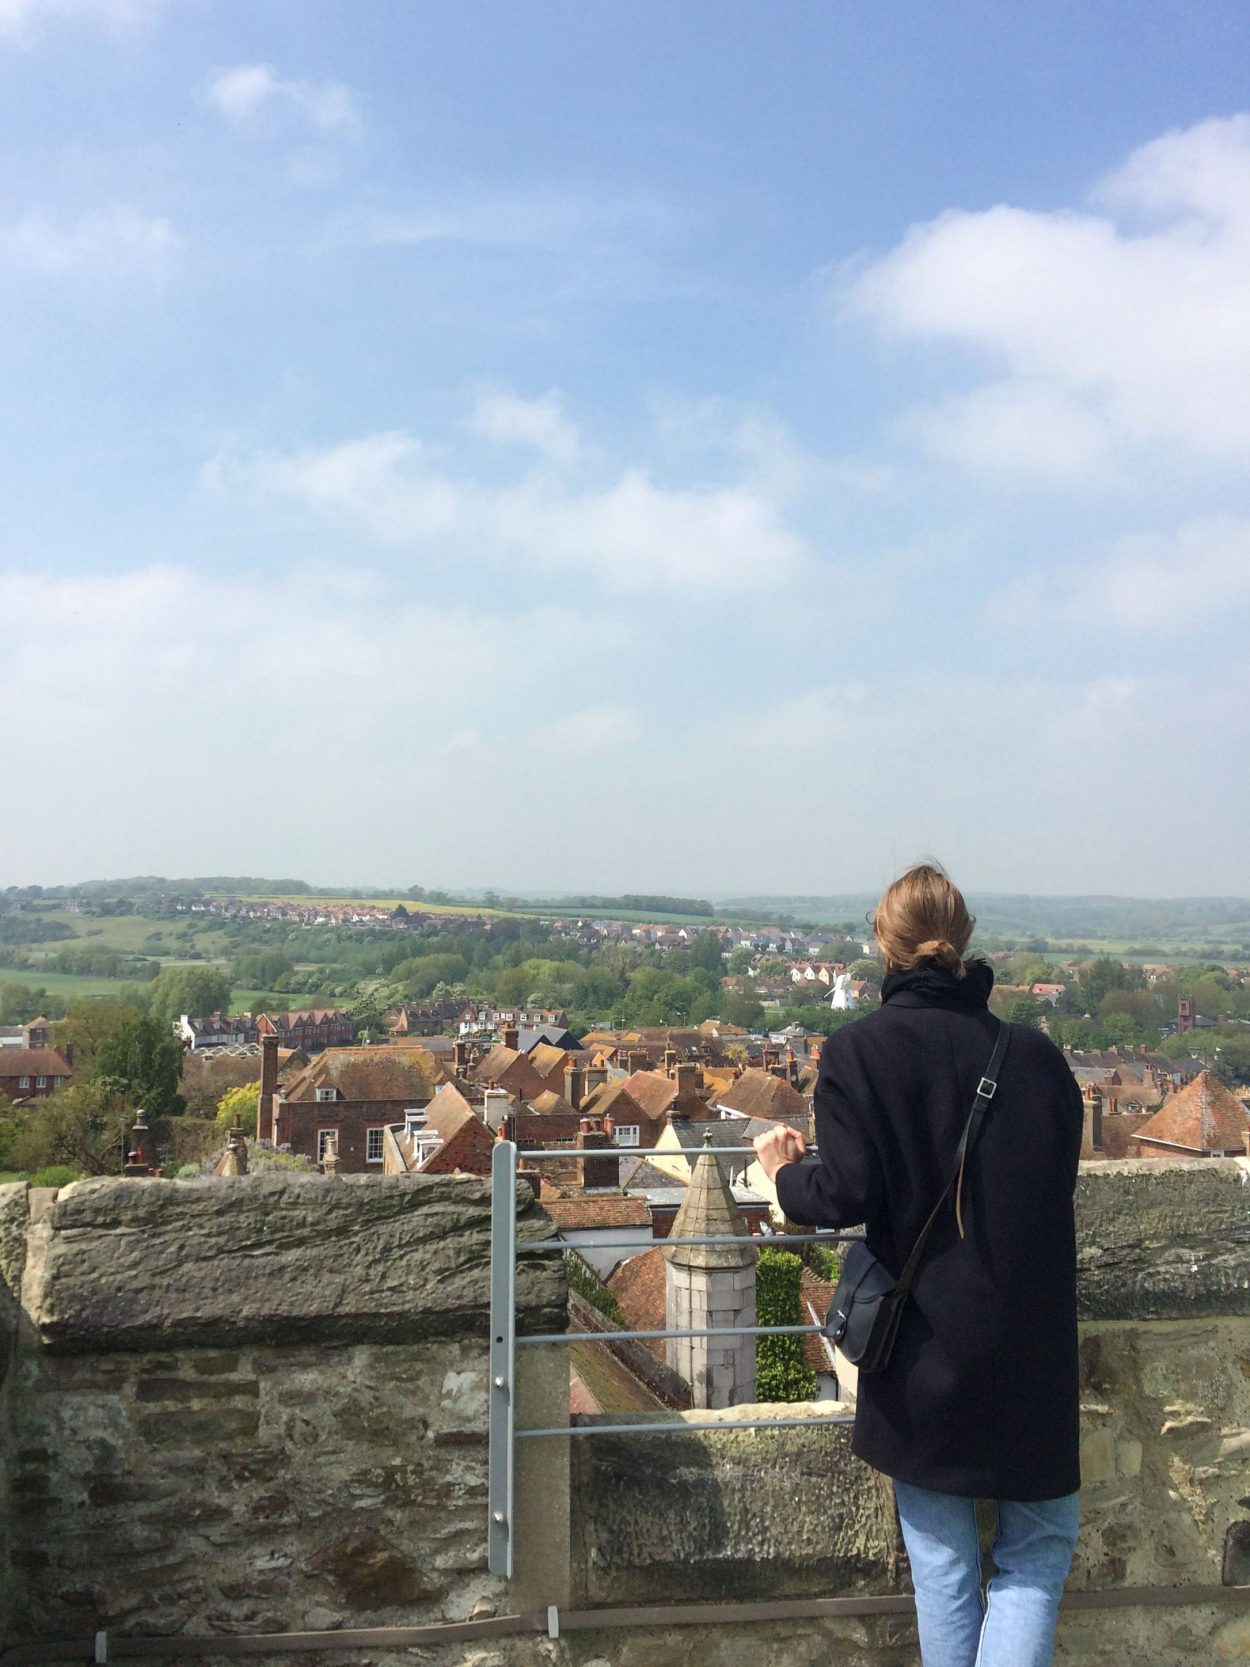 A woman looking at the view in Rye